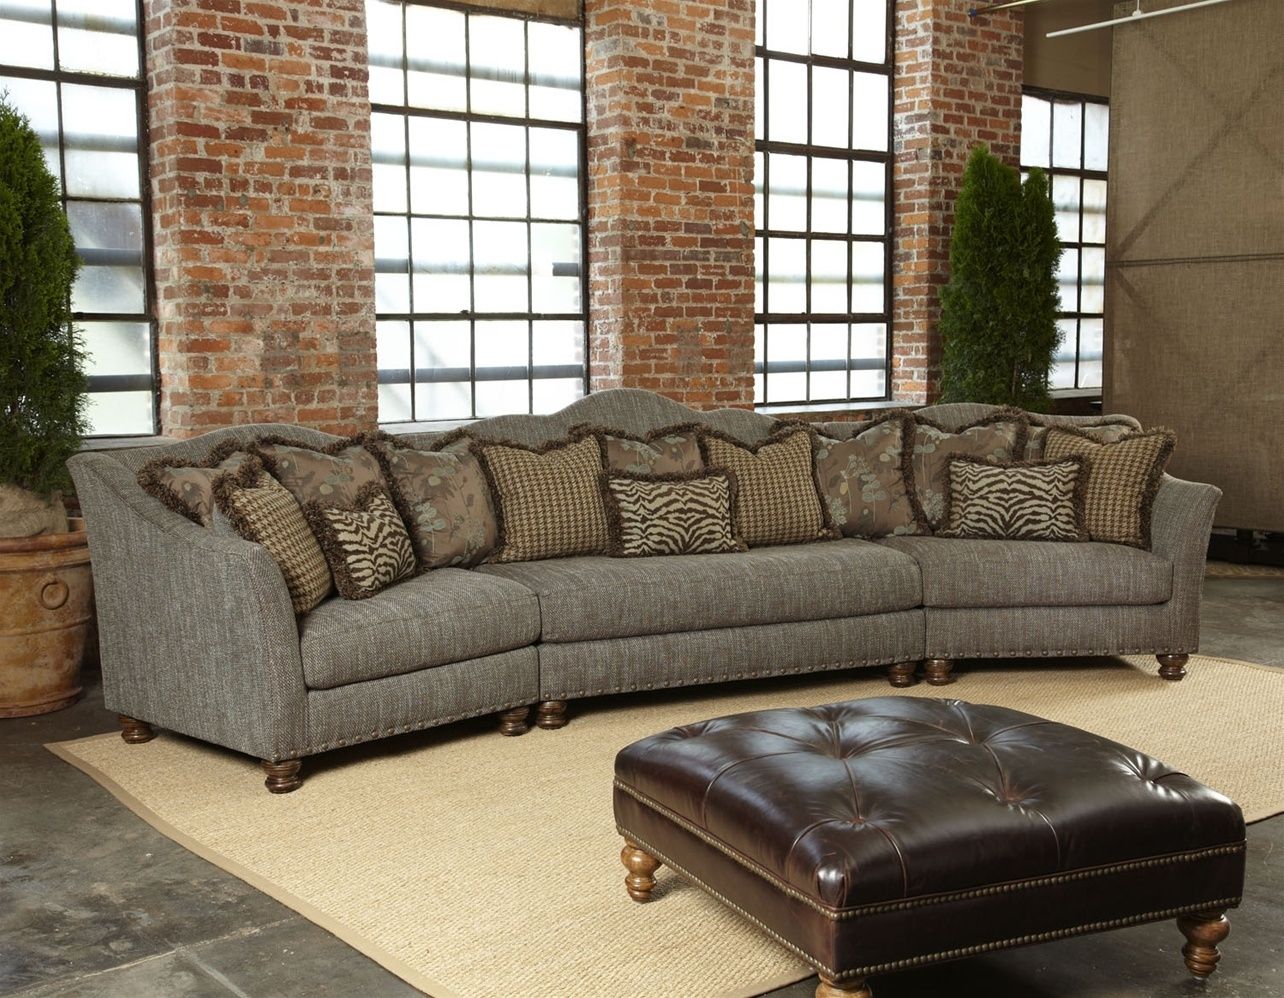 Luxury High Quality Sectional Sofa 20 With Additional Sofa Table Inside High Quality Sectional Sofas (Photo 1 of 10)